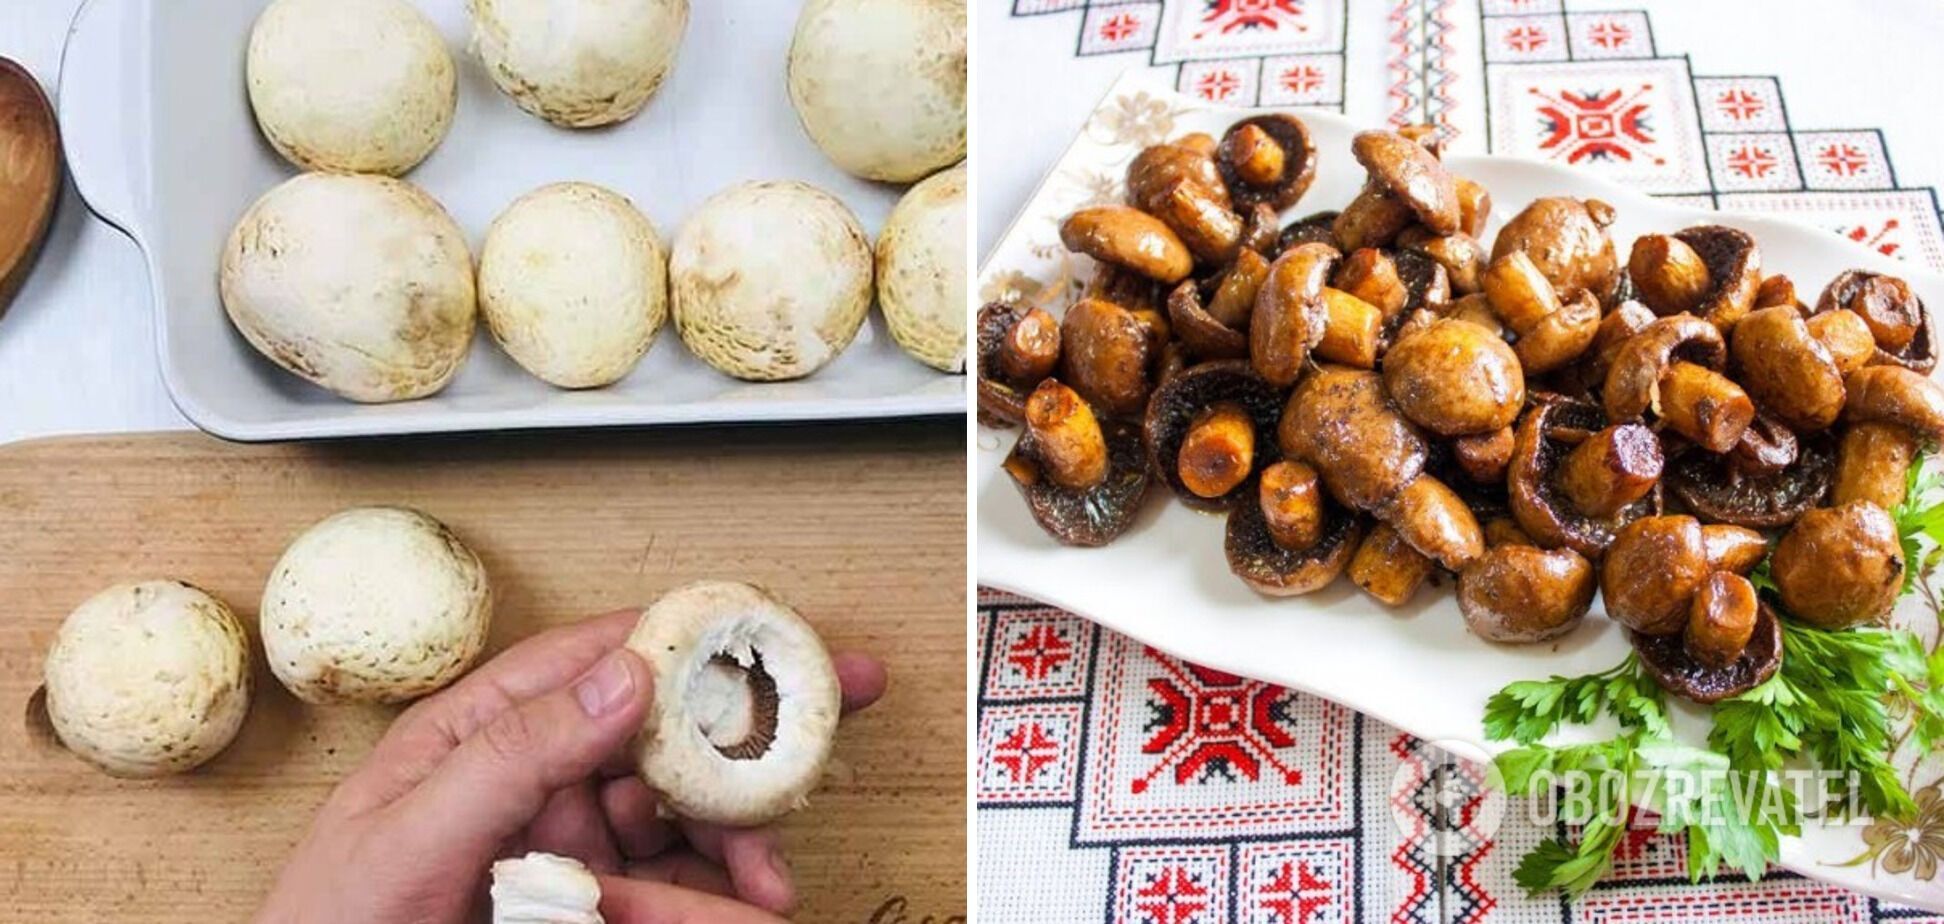 Recipe for baked mushrooms in the oven